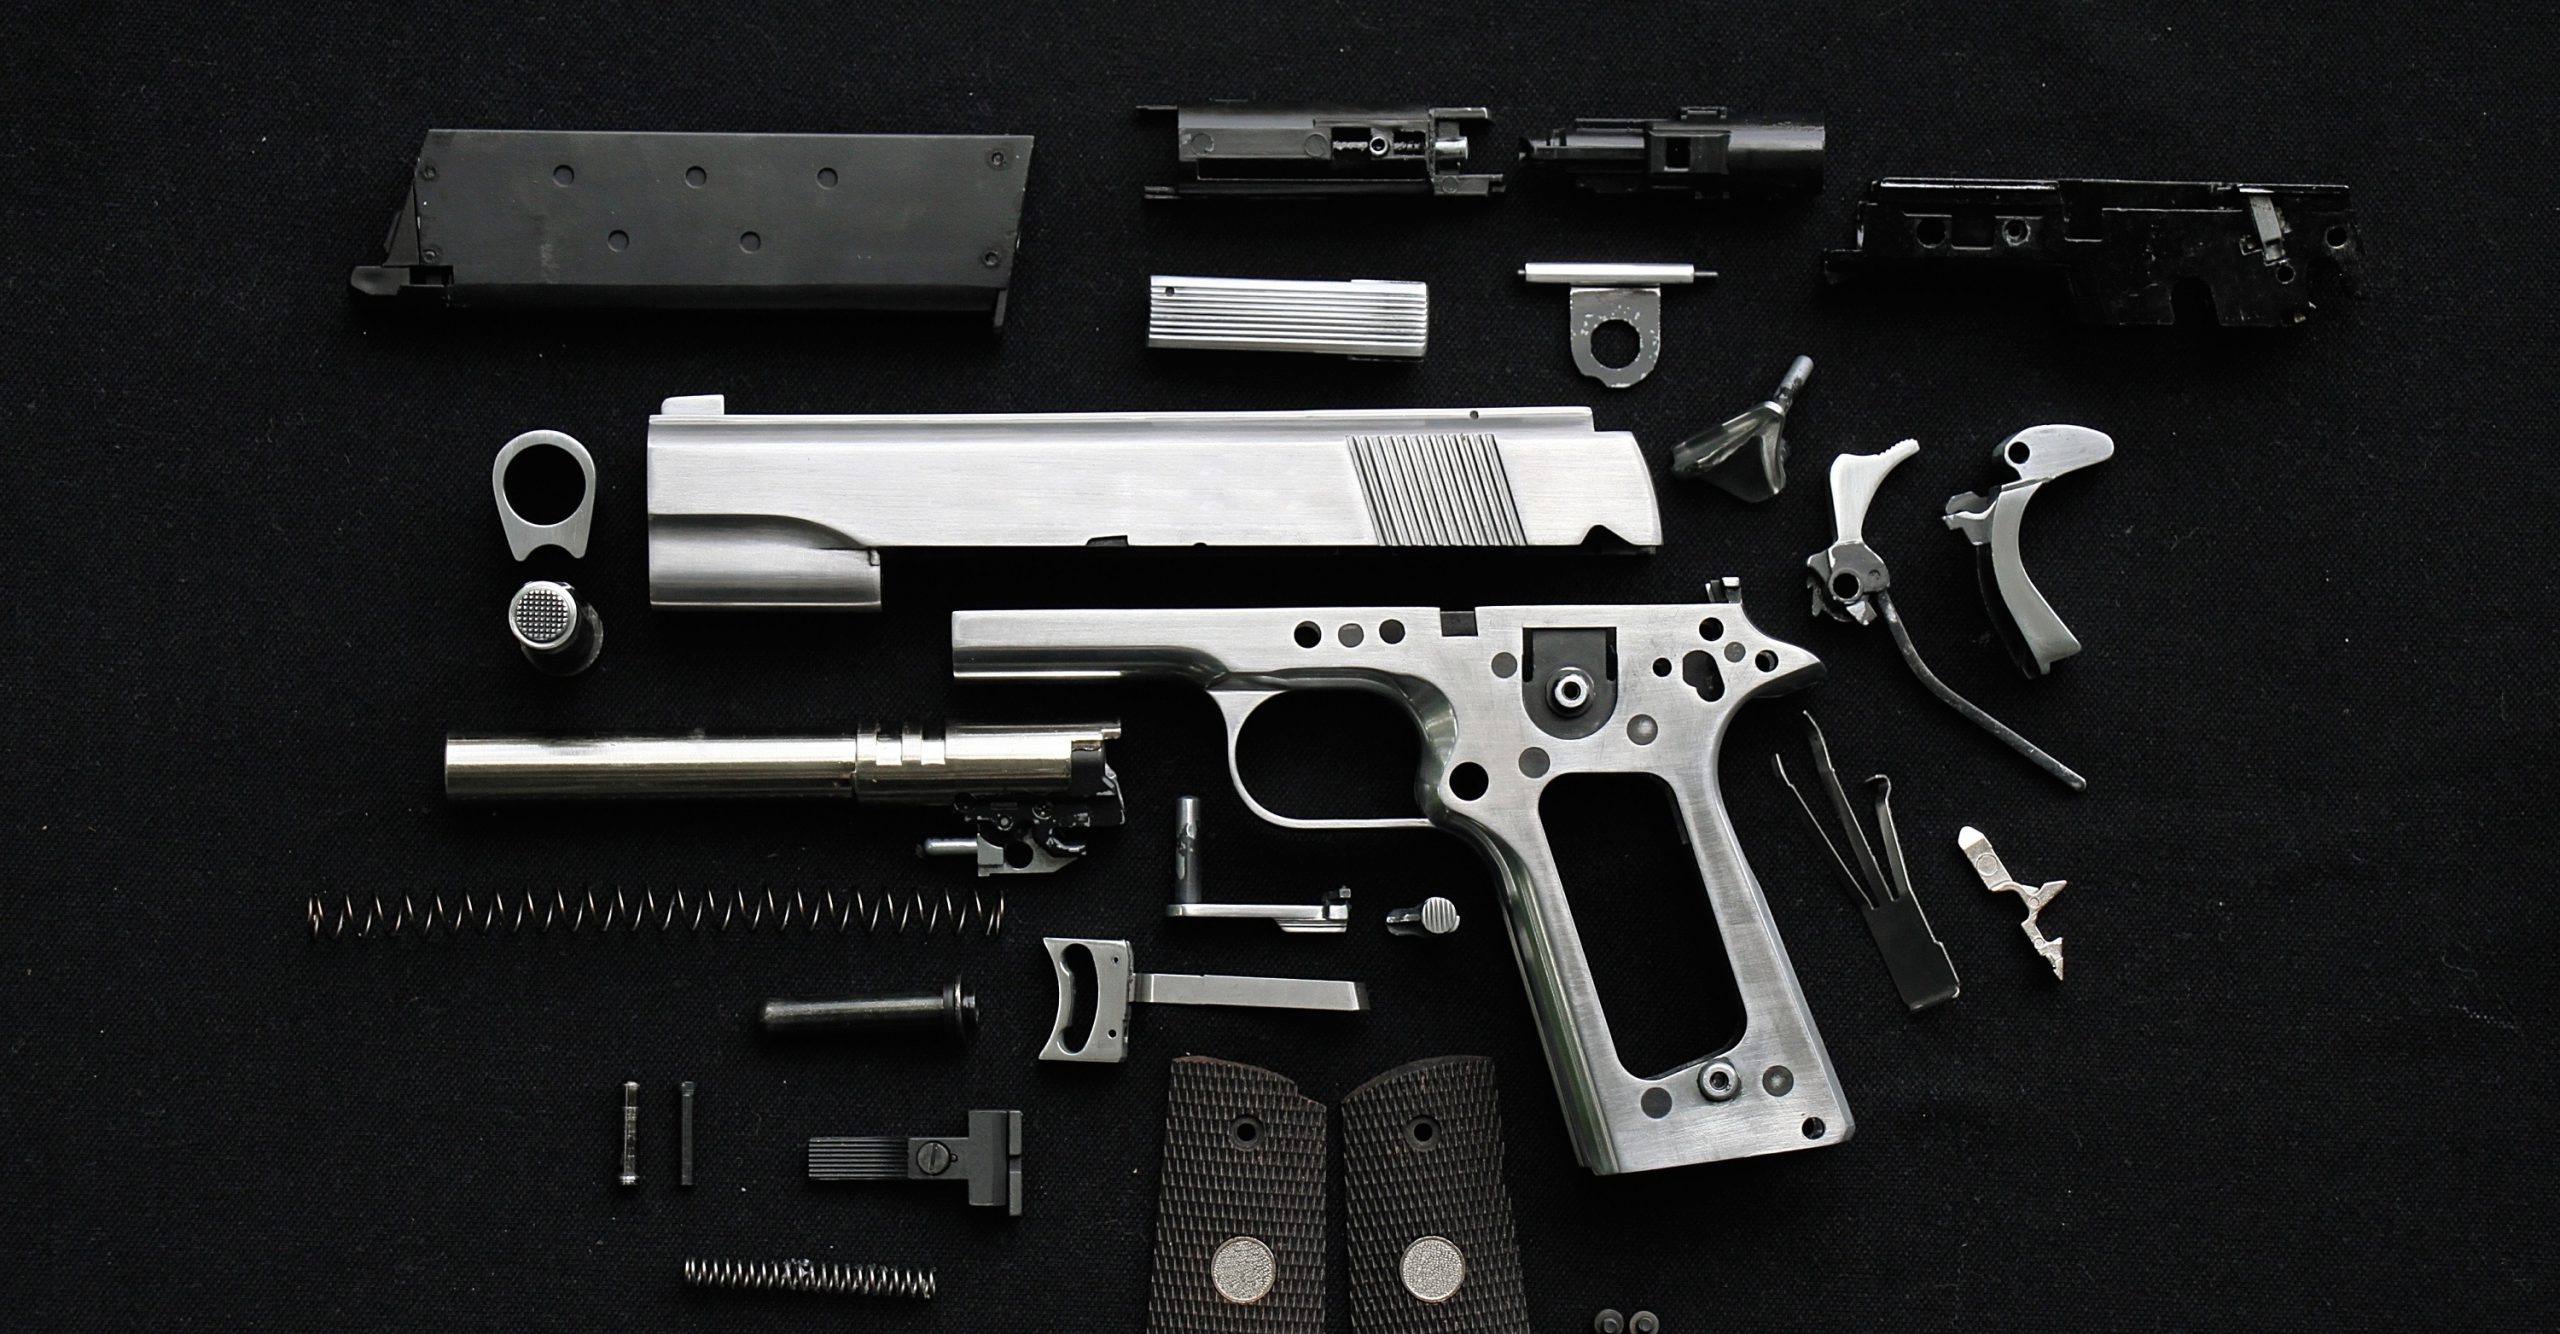 Airsoft Guns: Why Users Should Aim for Safety 